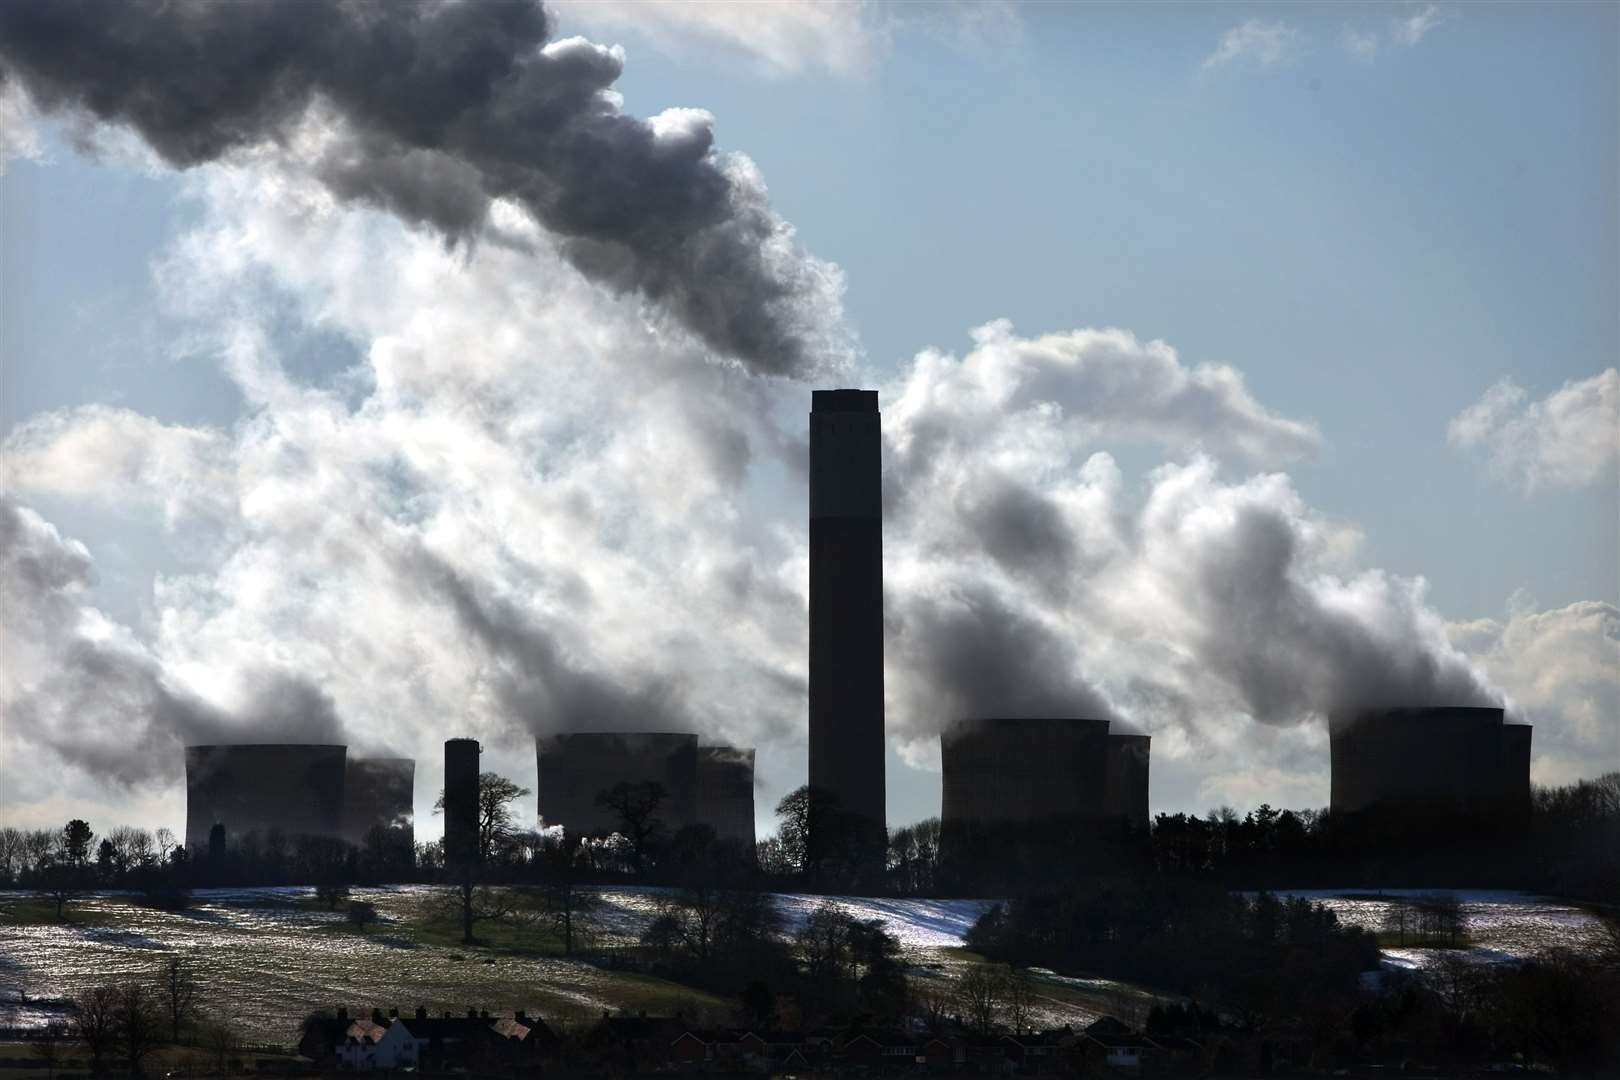 Carbon capture projects aim to store environmentally-harmful C02 emissions (David Jones/PA)